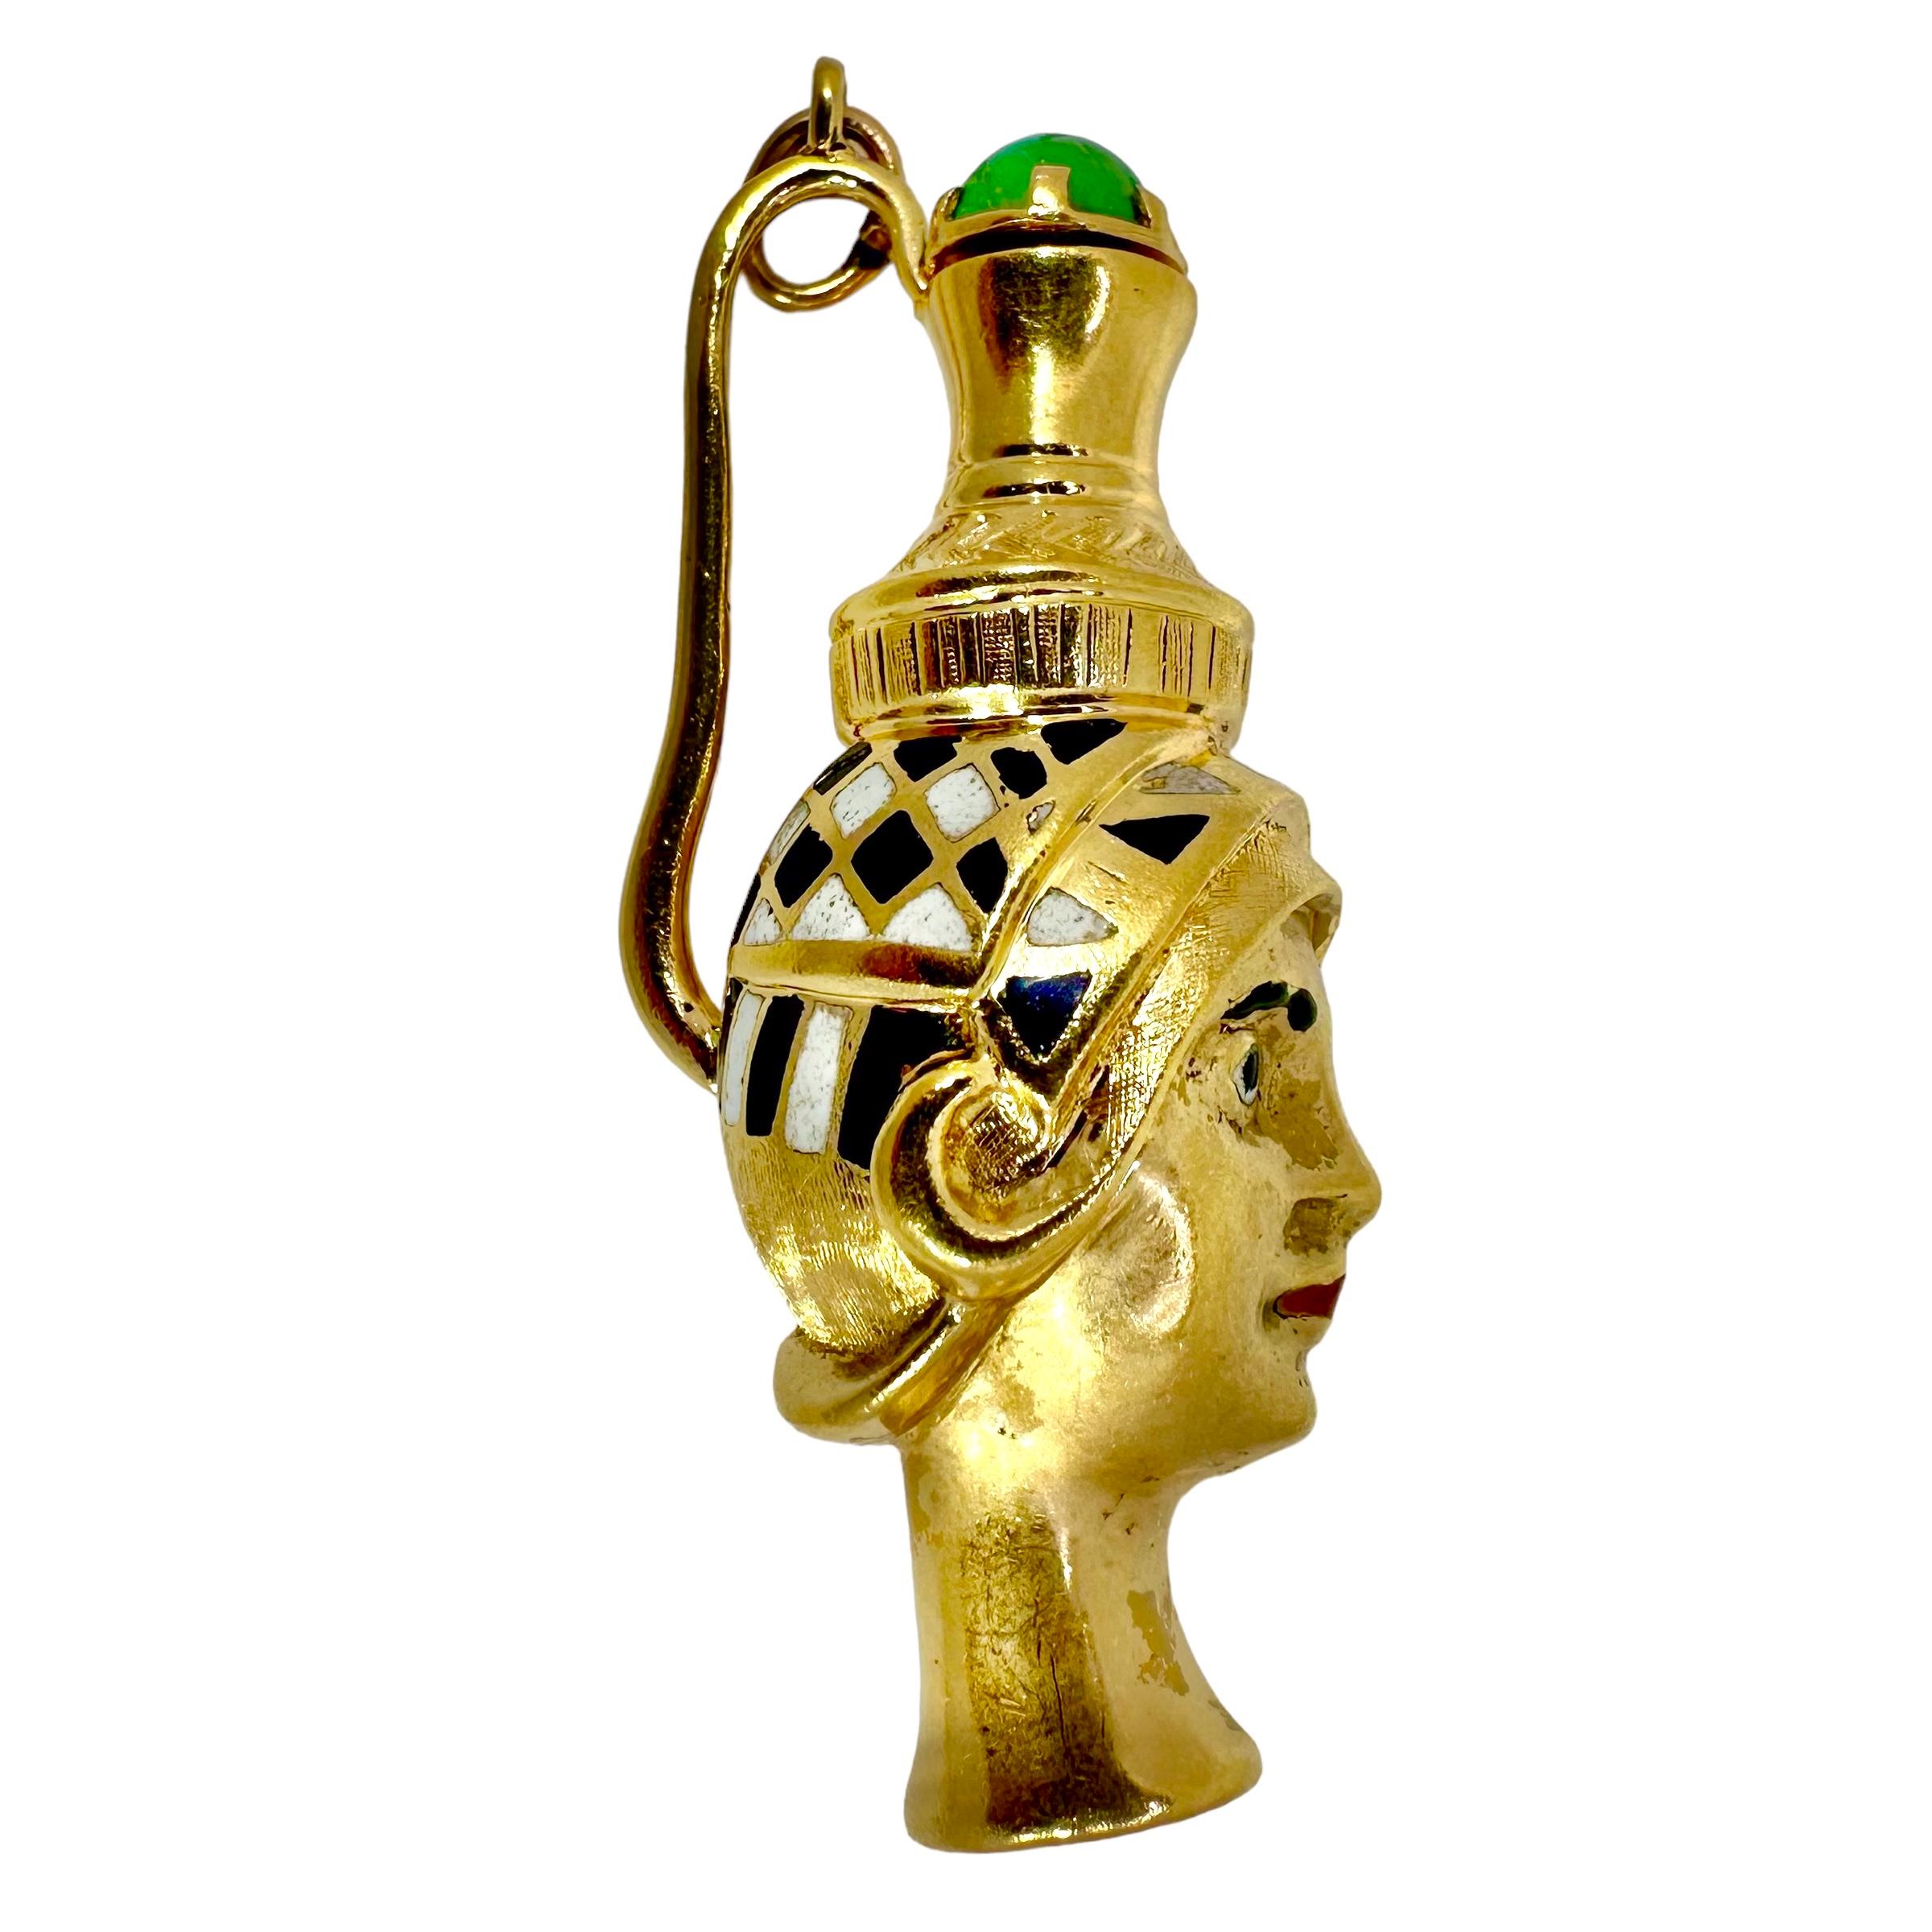 Positively Unique Vintage Gold Italian Vintage Egyptian Themed Perfume Amulet In Good Condition For Sale In Palm Beach, FL